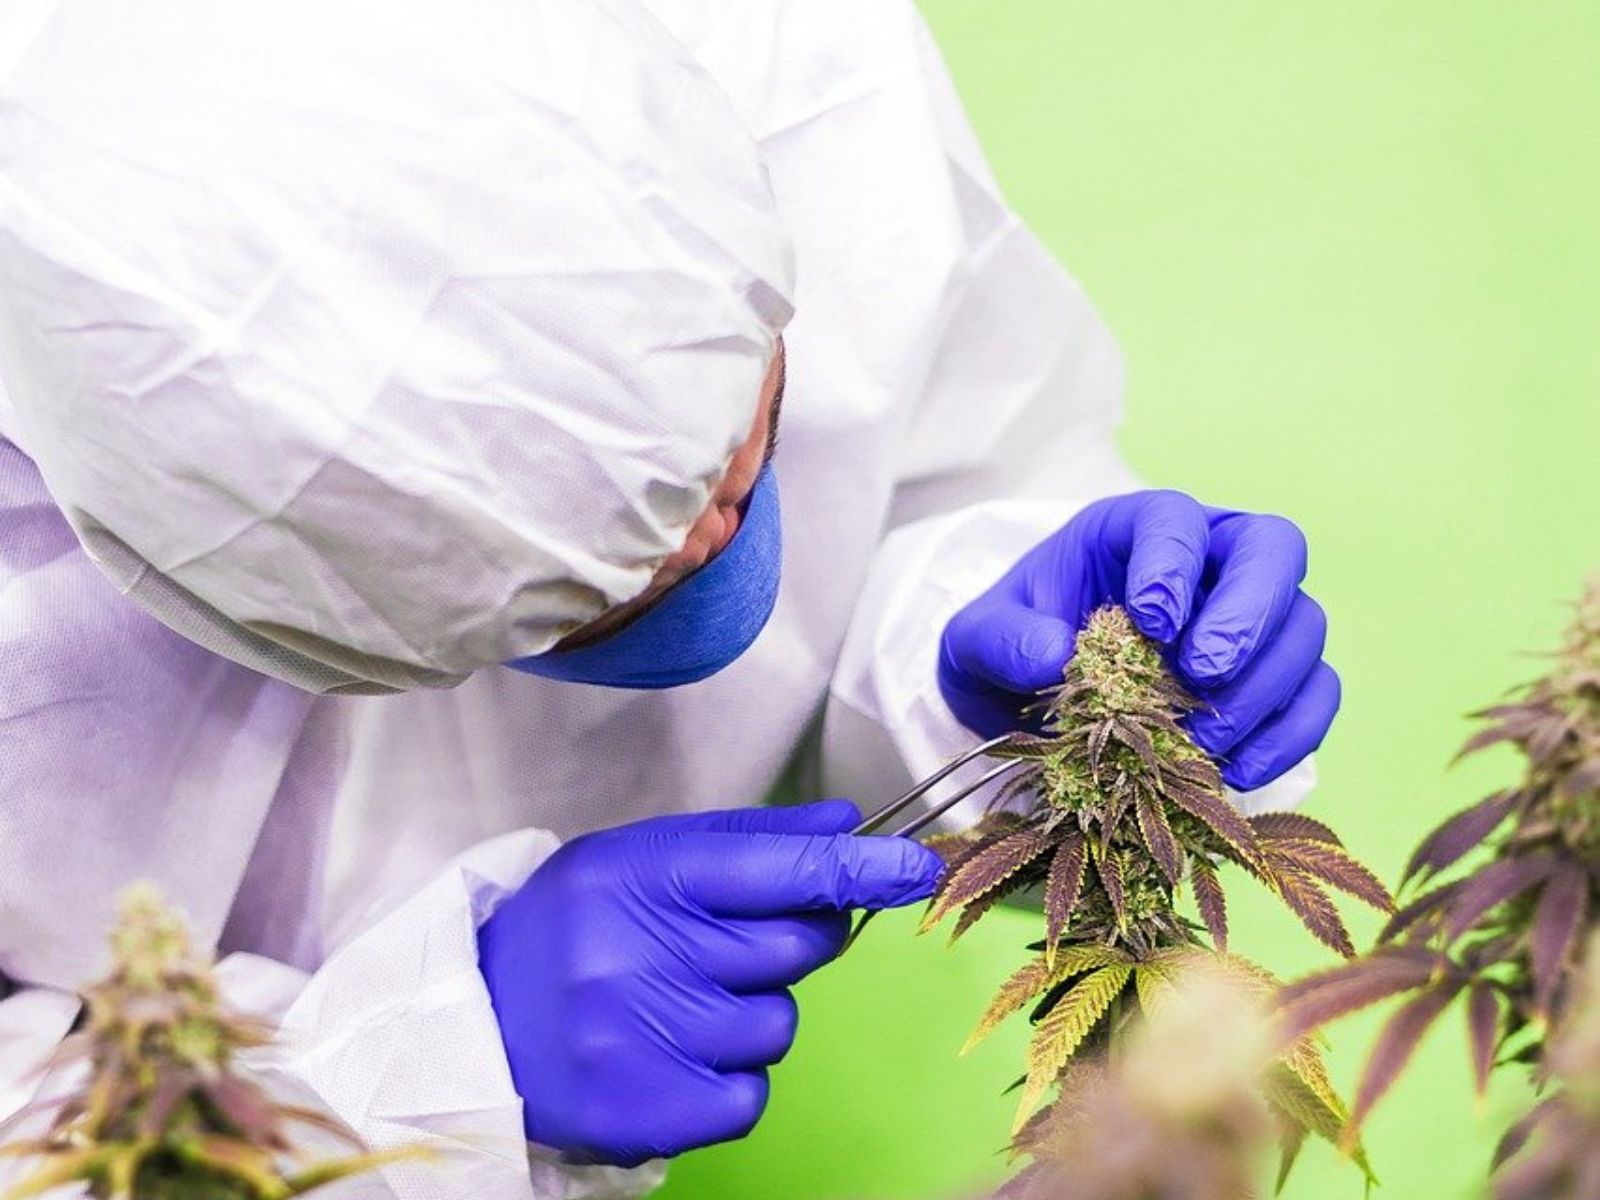 How Accurate Are Cannabis Product Lab Tests?